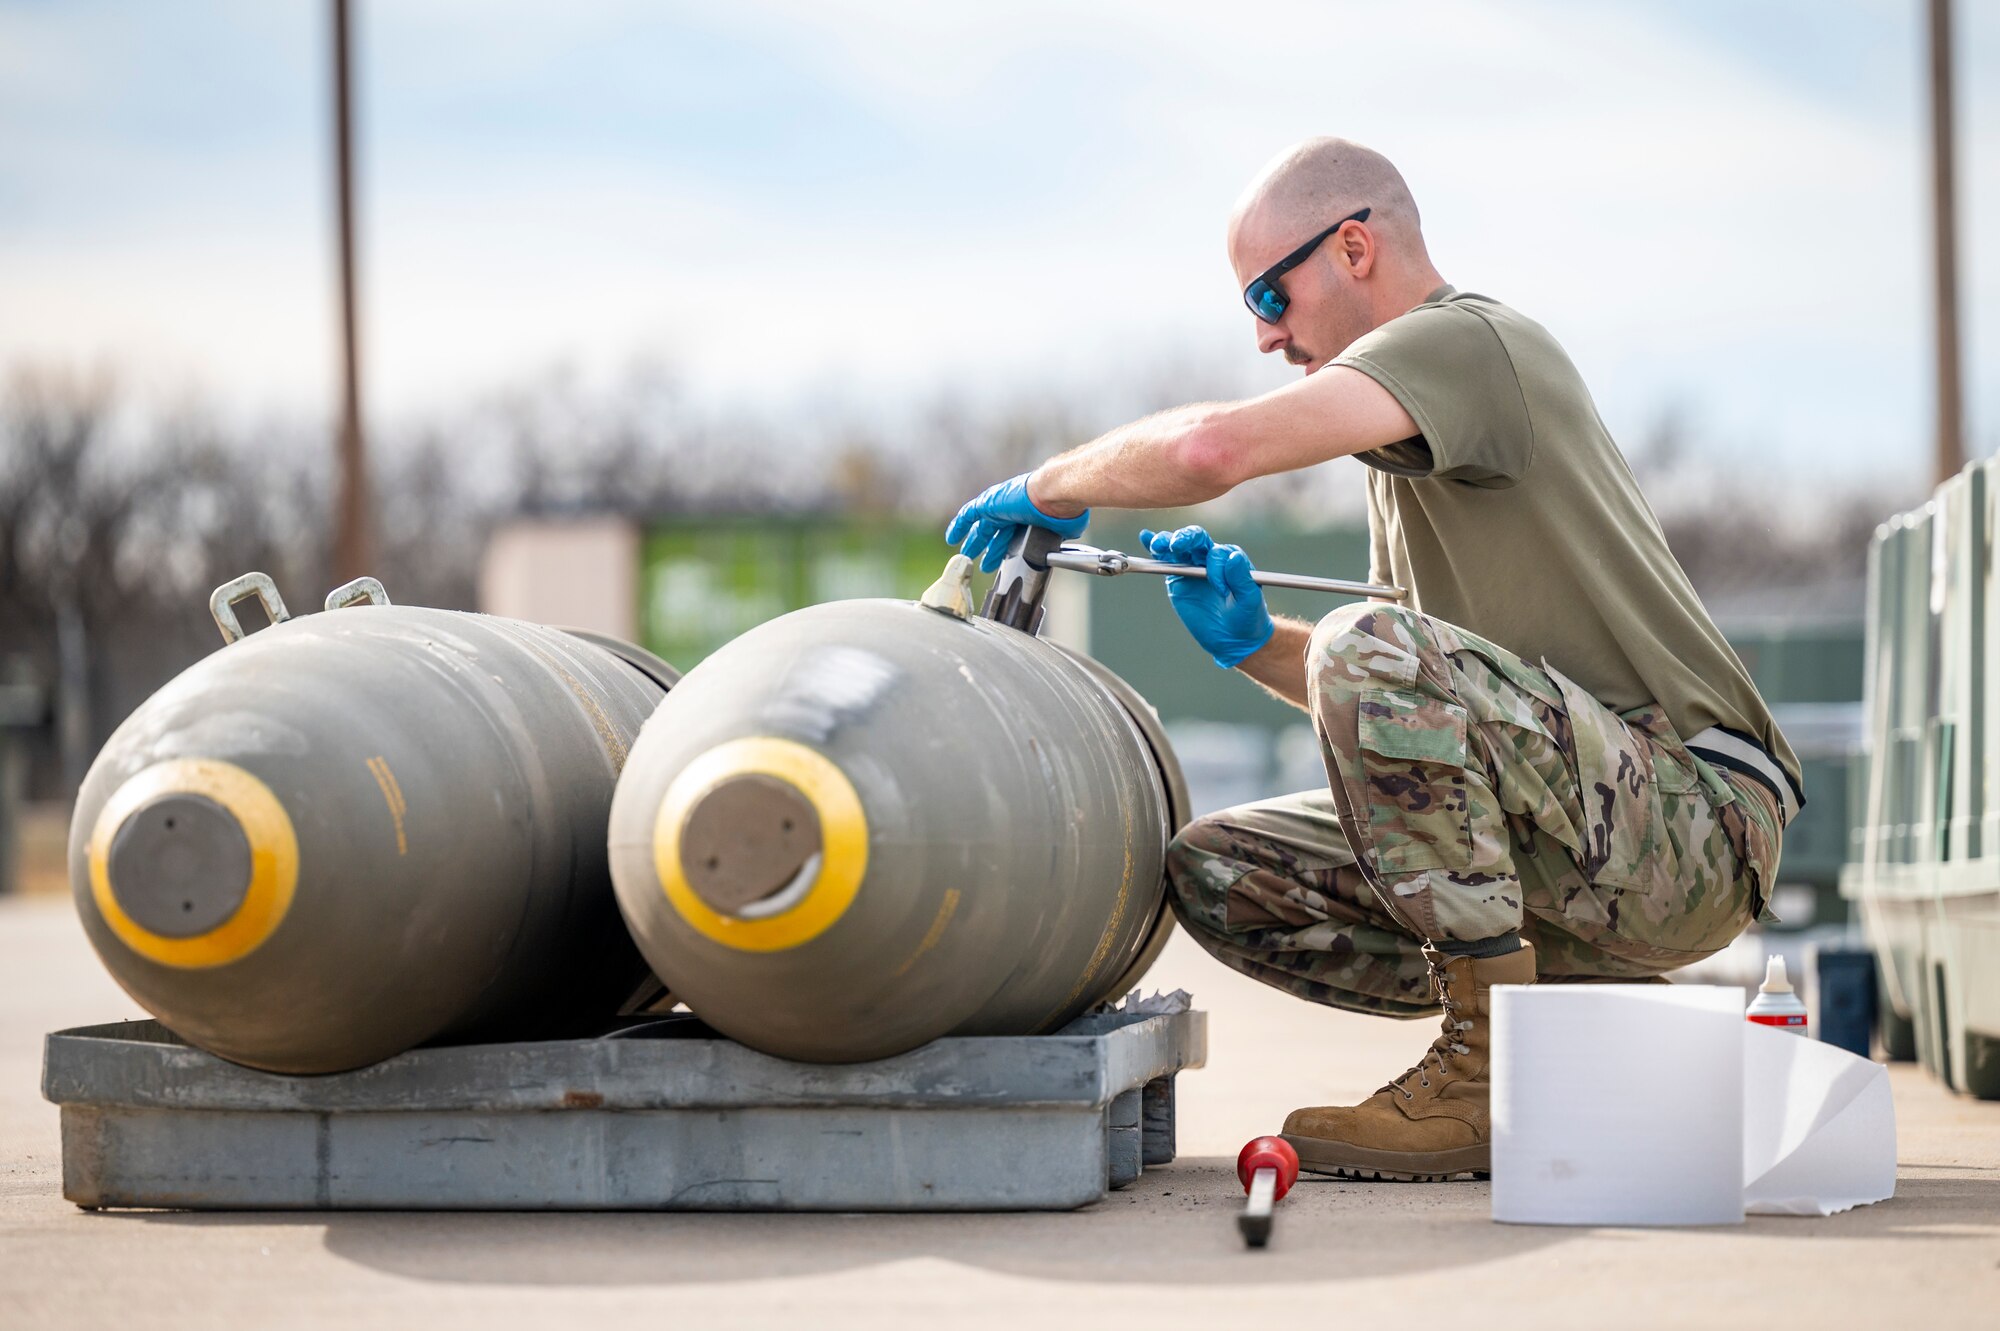 An Airman from the 7th Munitions Conventional Maintenance shop prepares Joint Direct Attack Munitions at Dyess Air Force Base, Texas, Jan. 31, 2024. Ellsworth Air Force Base B-1Bs recently launched from Dyess Air Force Base to support U.S. Central Command priorities, validating the United States Air Force capability to provide precision, long-range strike anytime, anywhere. (U.S. Air Force photo by Senior Airman Leon Redfern)